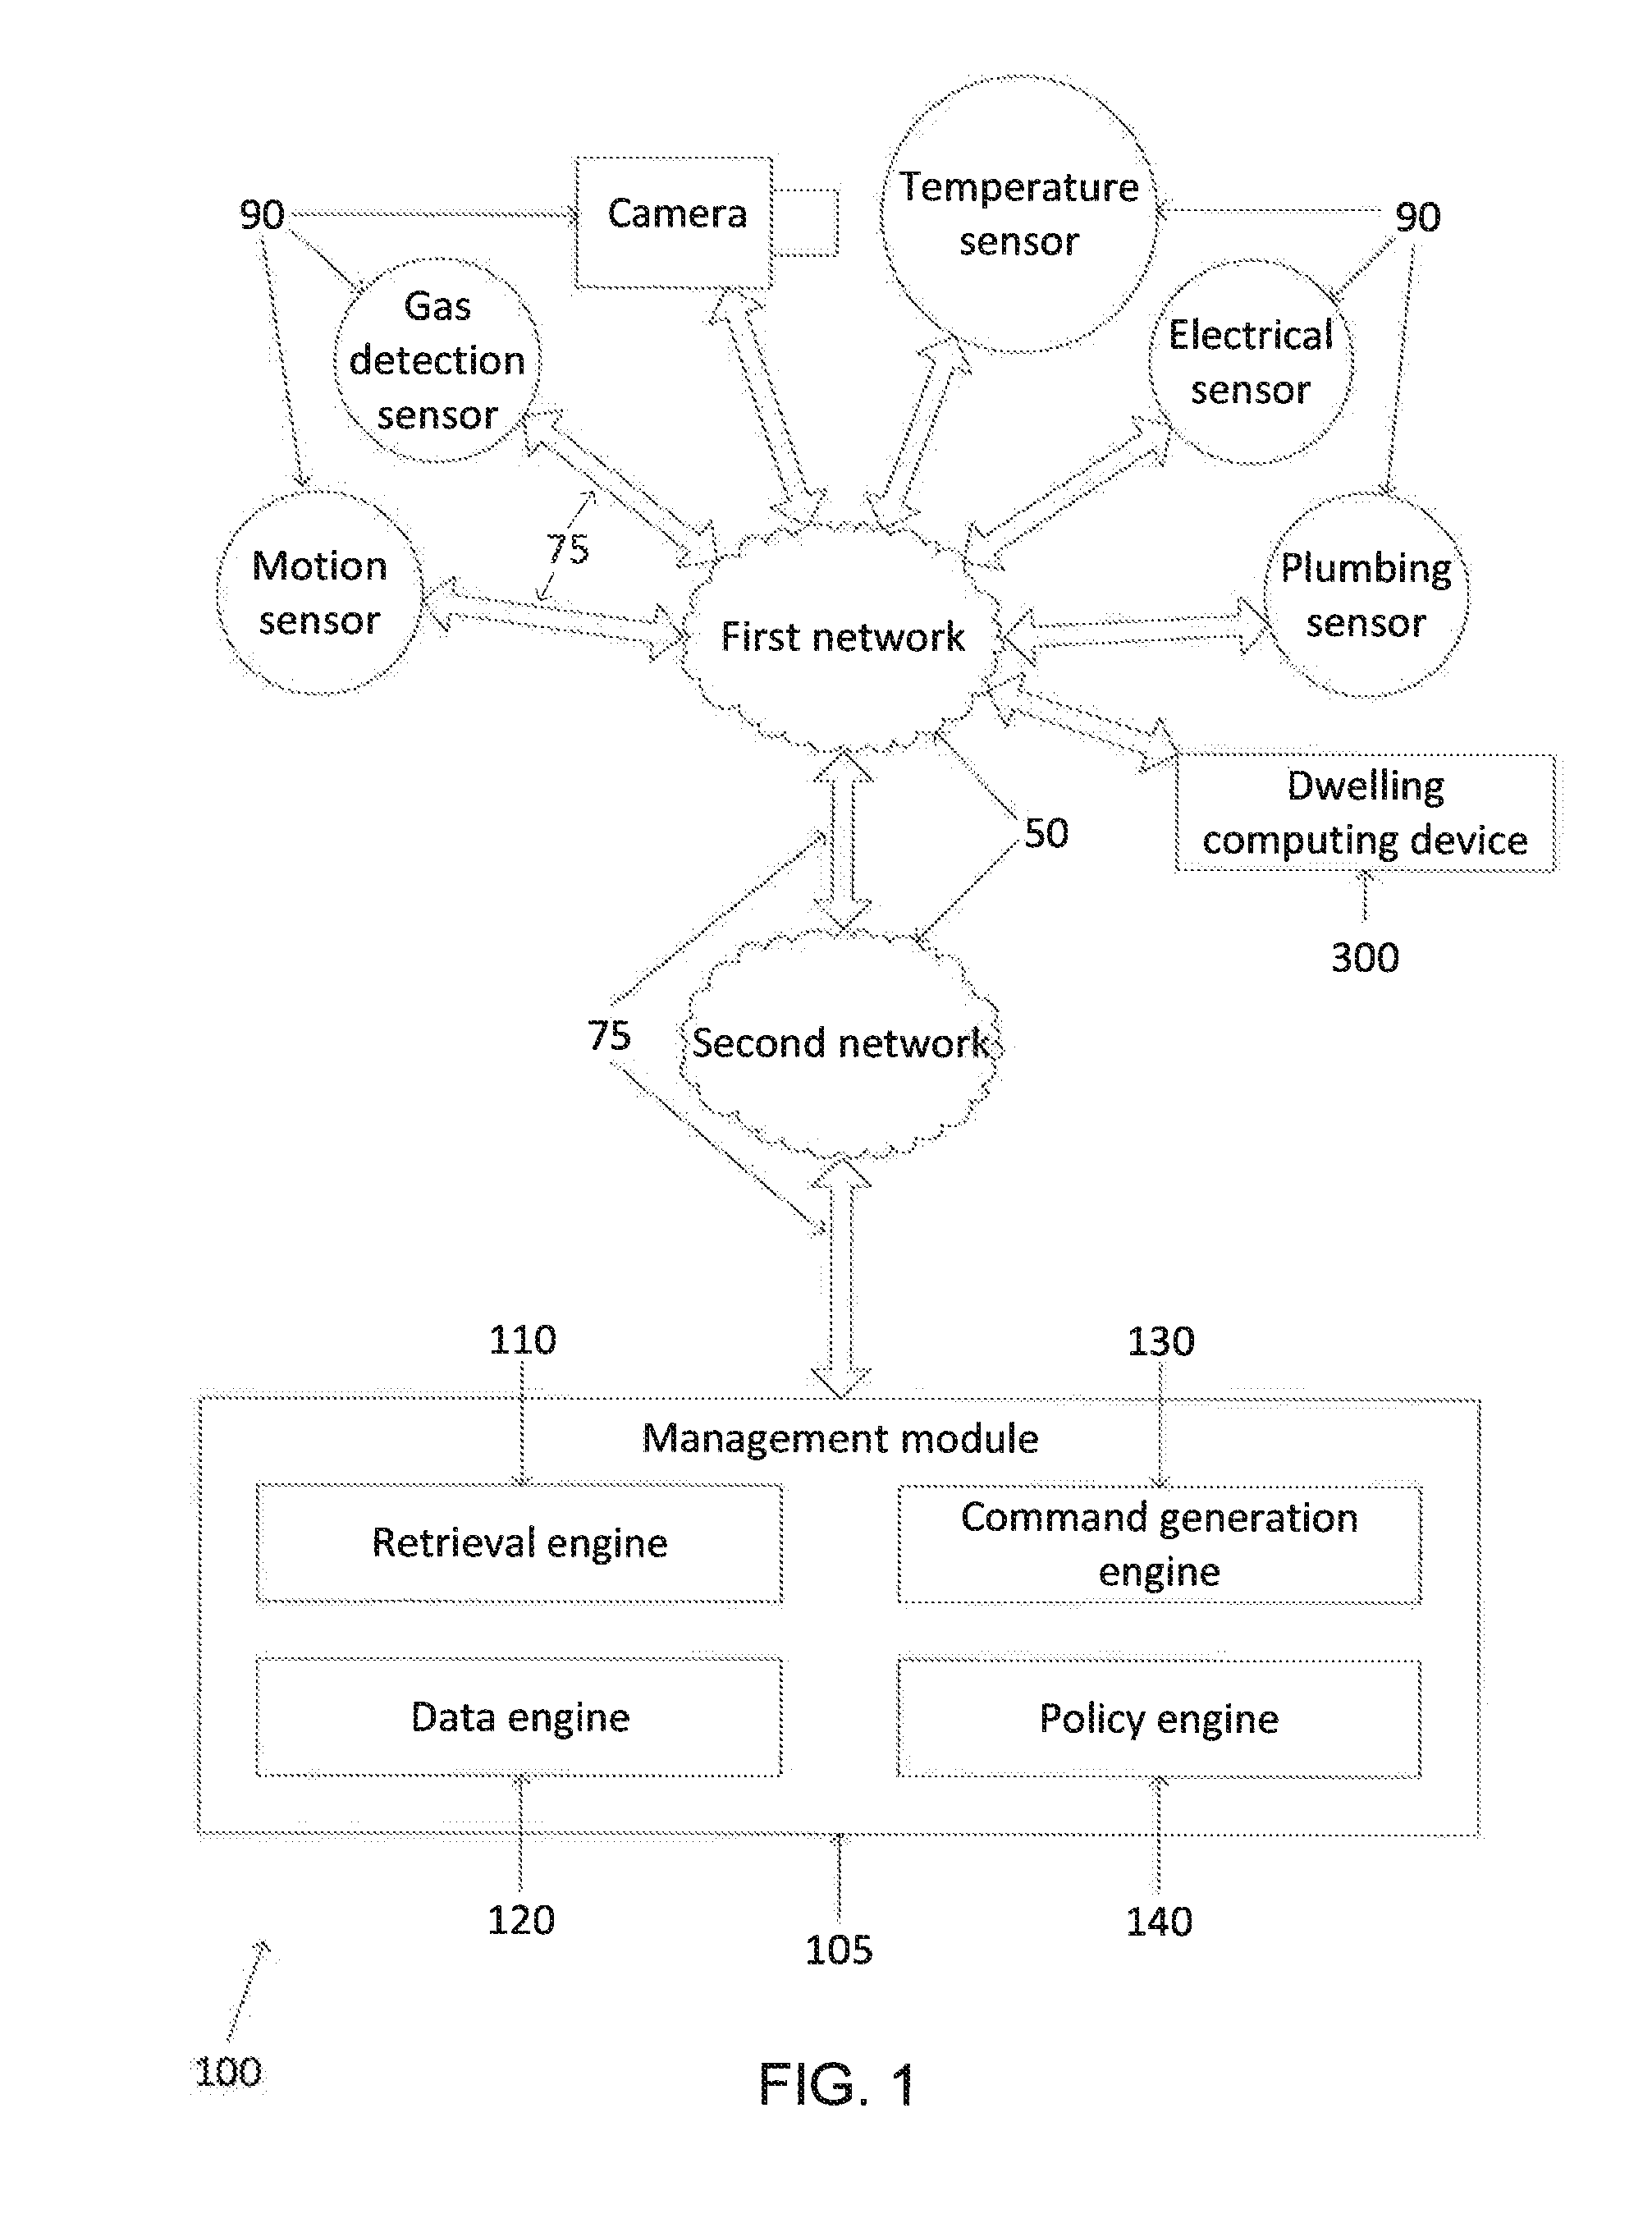 Systems and methods for utilizing sensor informatics to determine insurance coverage and recoverable depreciation for personal or business property